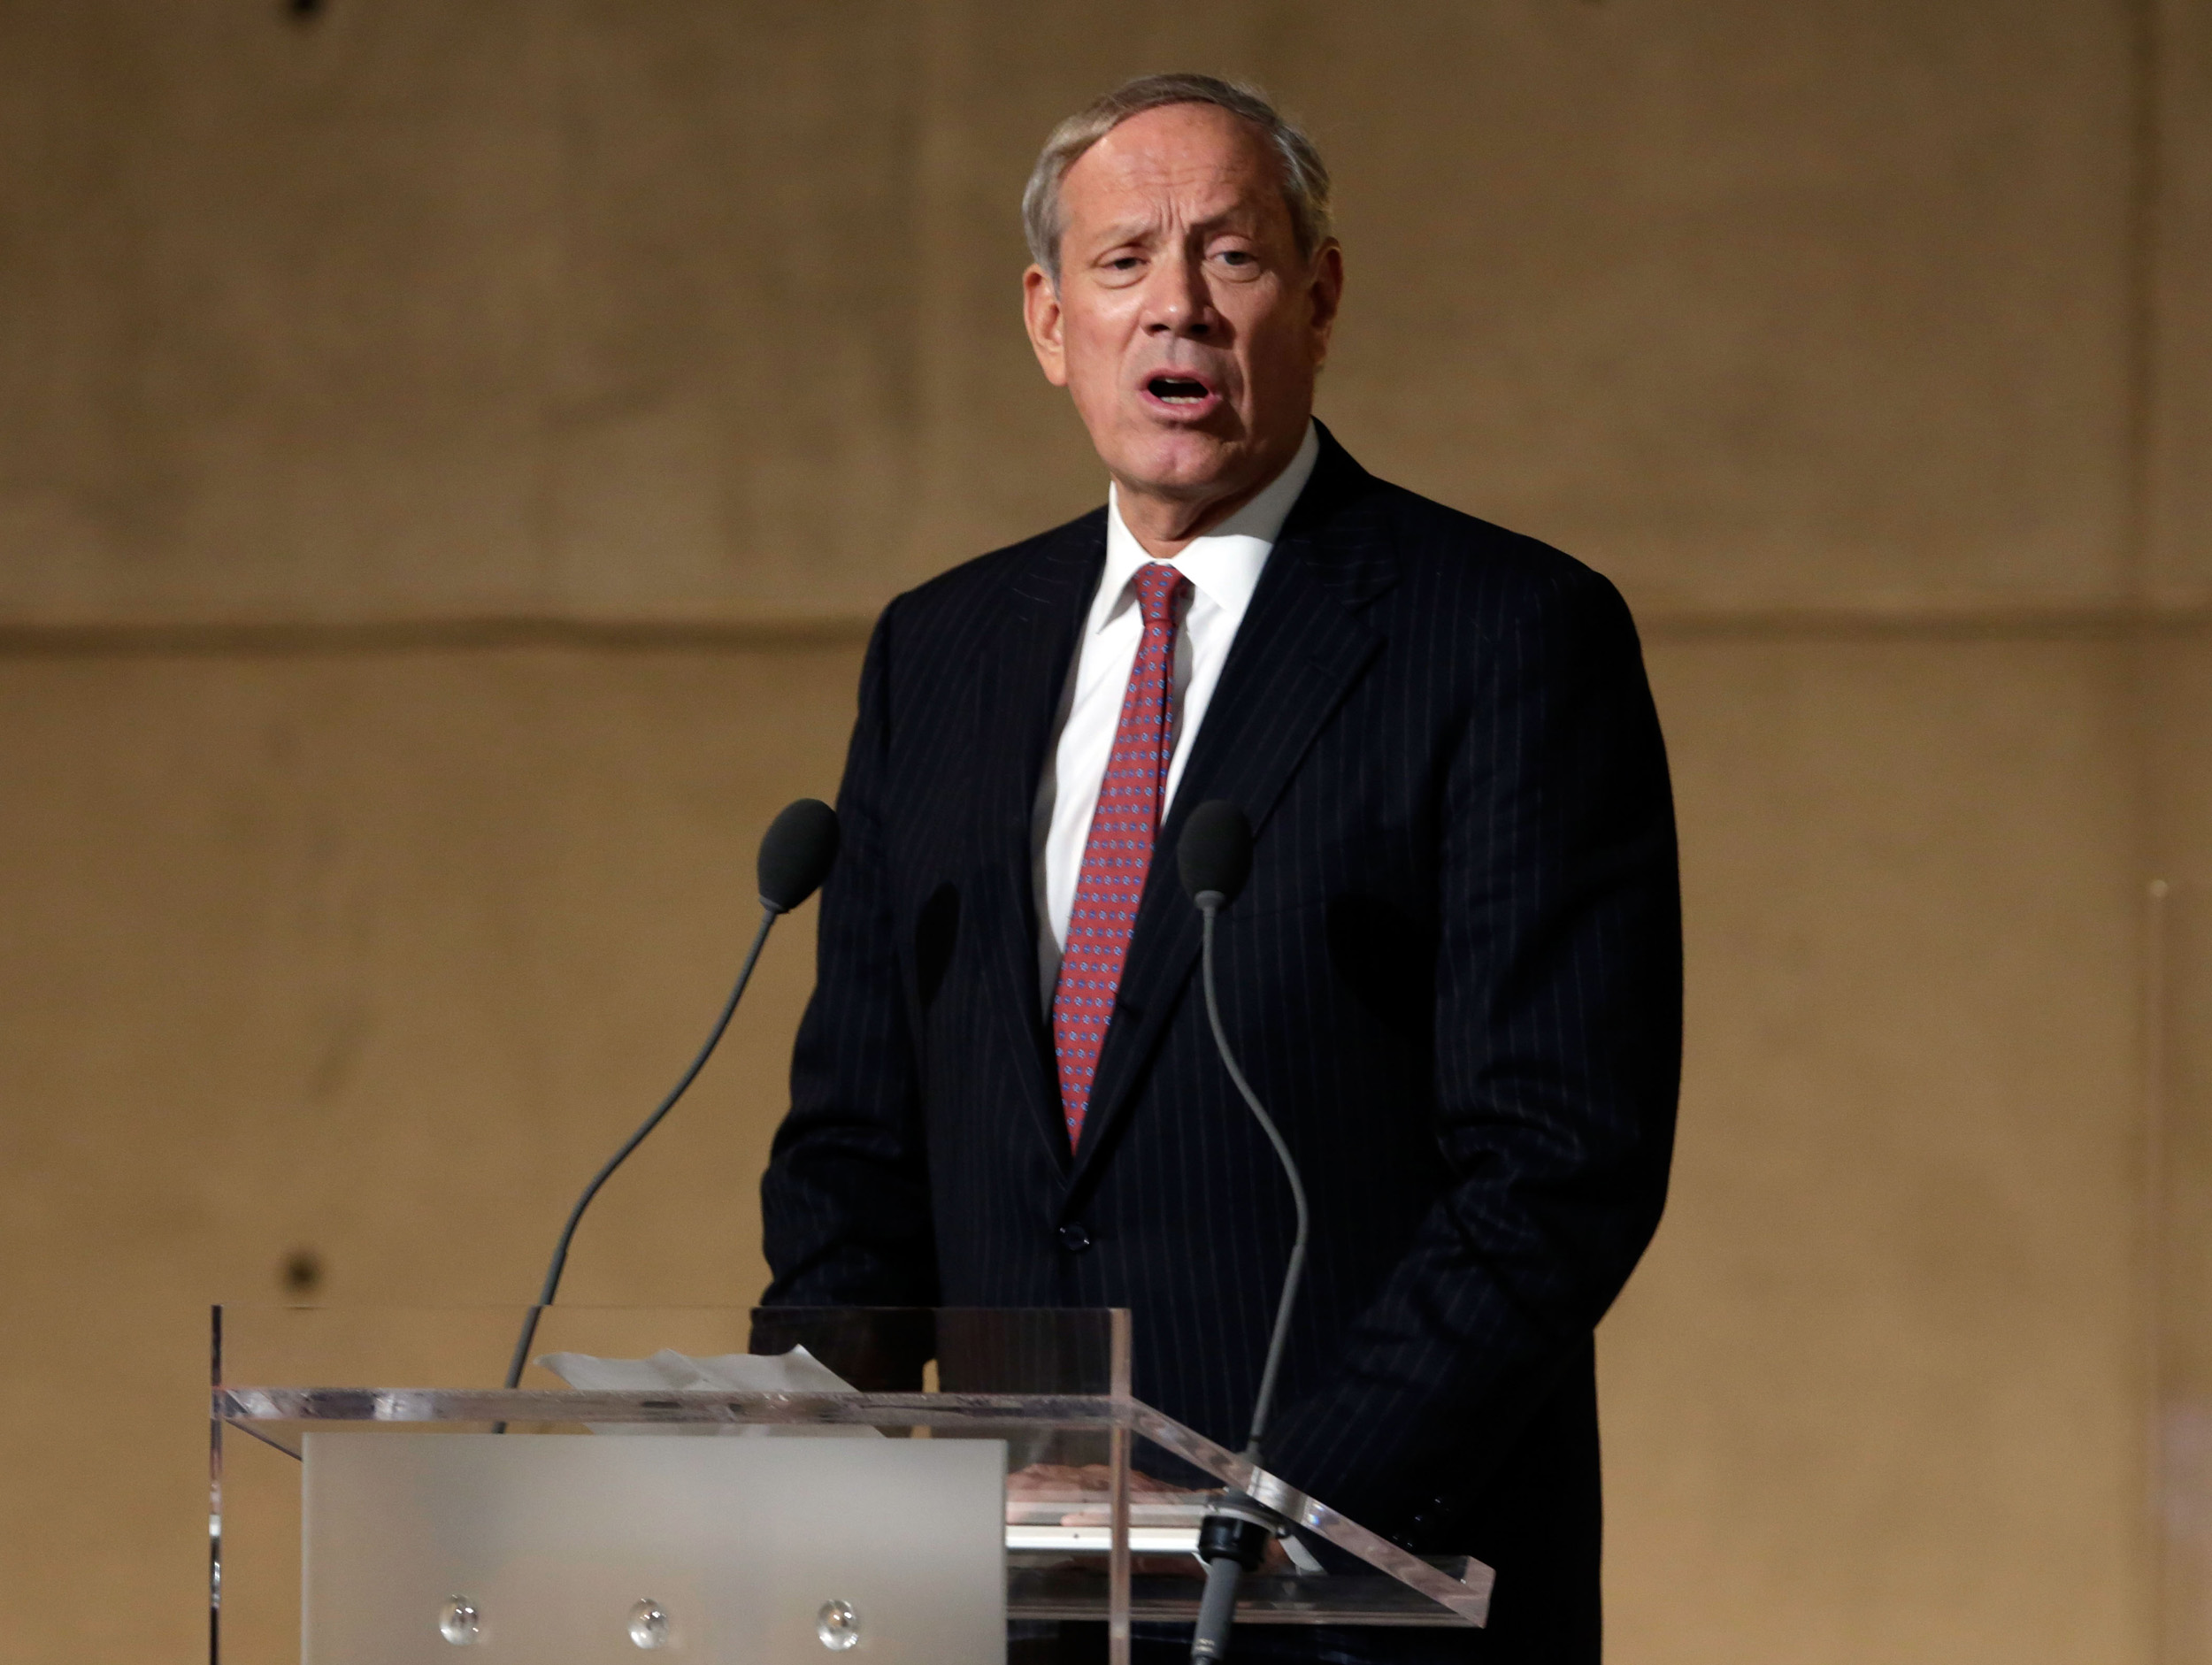 Former New York Gov. George Pataki speaks during the dedication ceremony in Foundation Hall at the National September 11 Memorial Museum at ground zero in New York City on May 15, 2014. (Richard Drew—Pool/Getty Images)